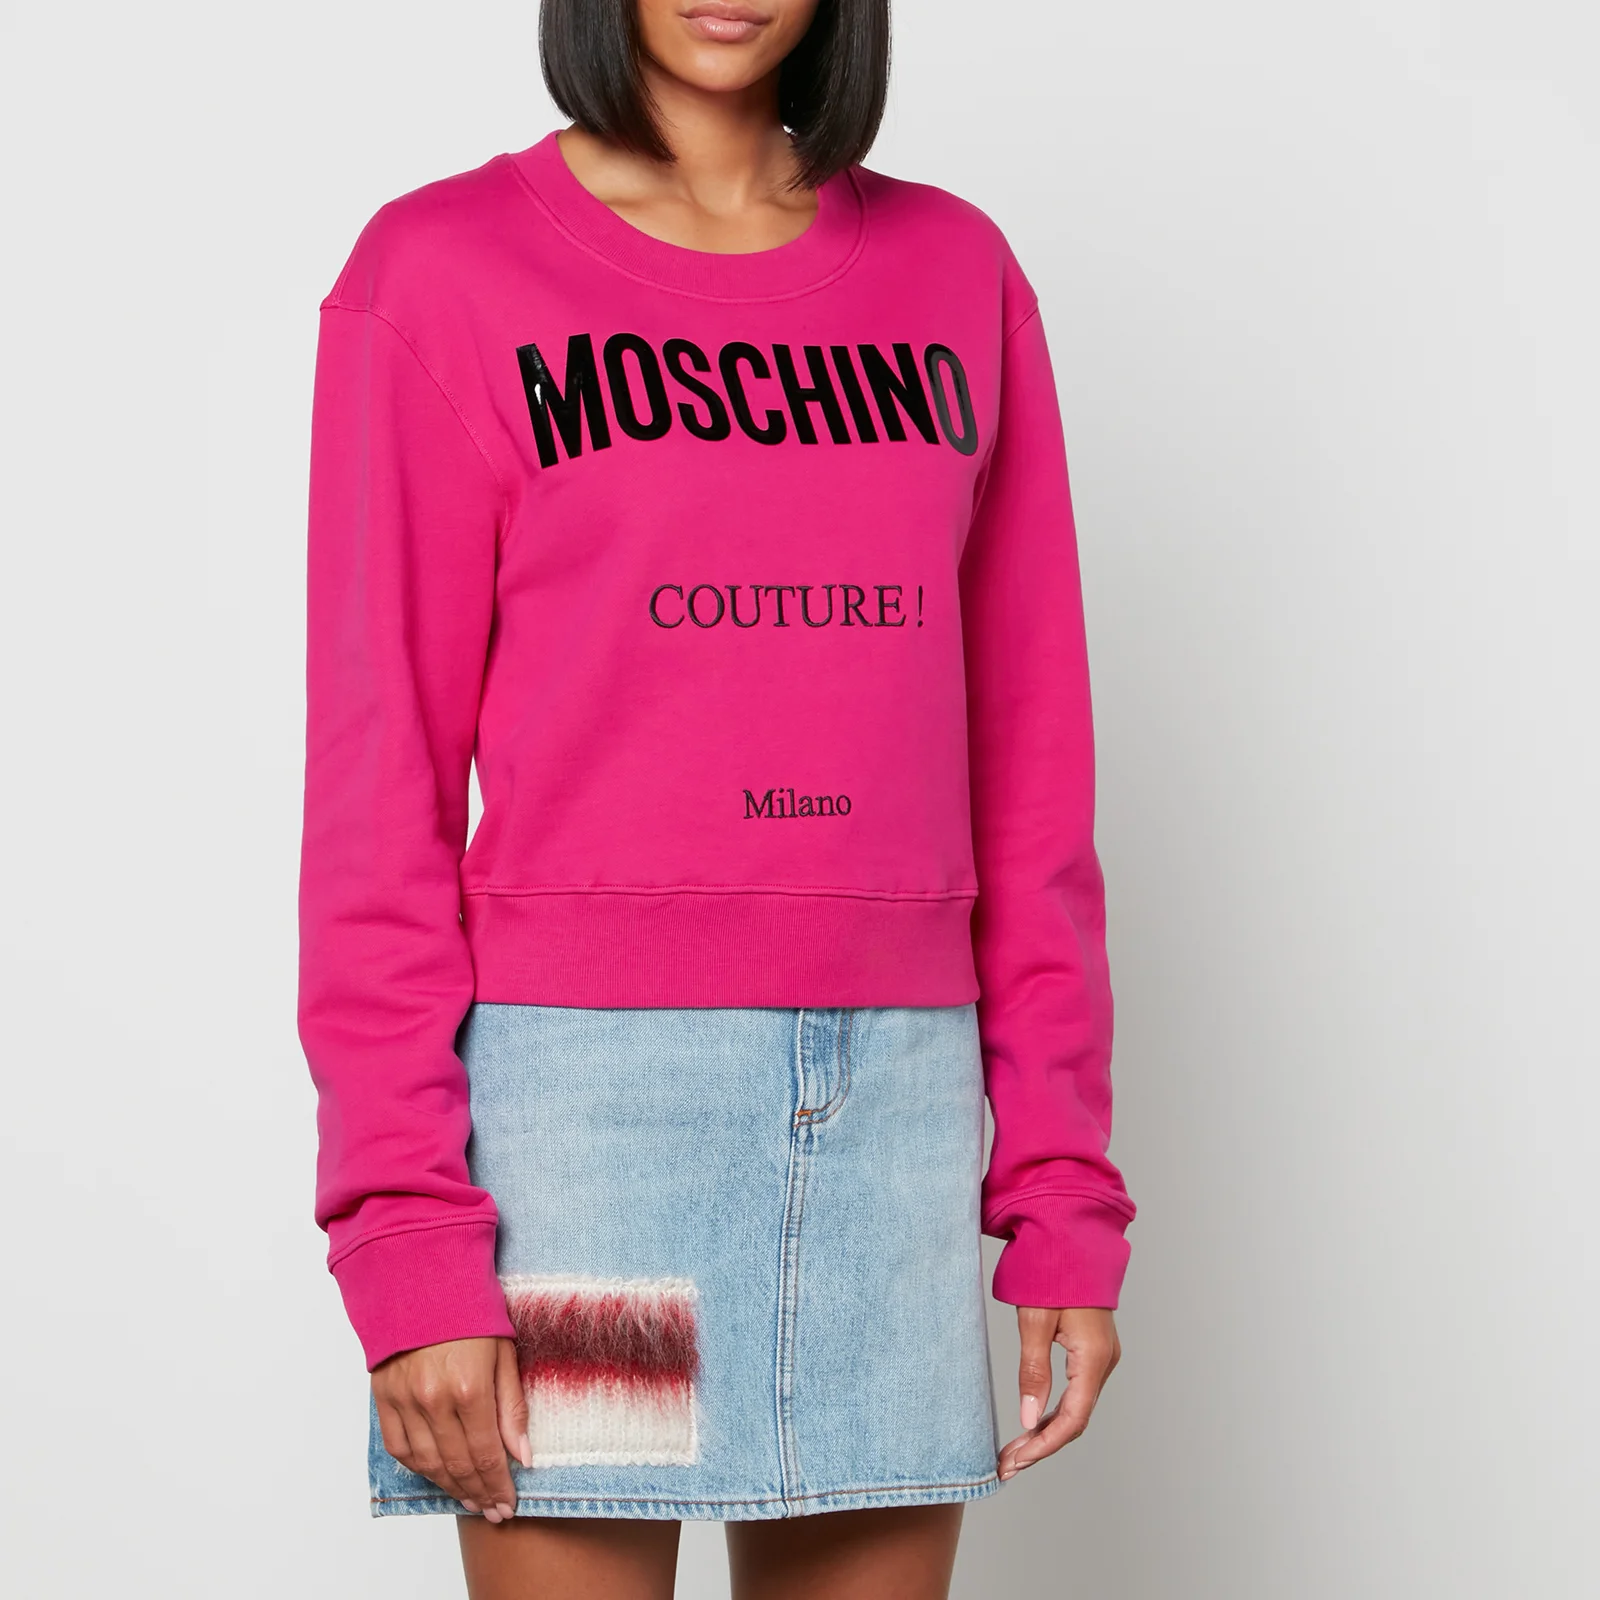 Moschino Women's Couture Logo Hoodie - FANTASY PRINT VIOLET - x Image 1